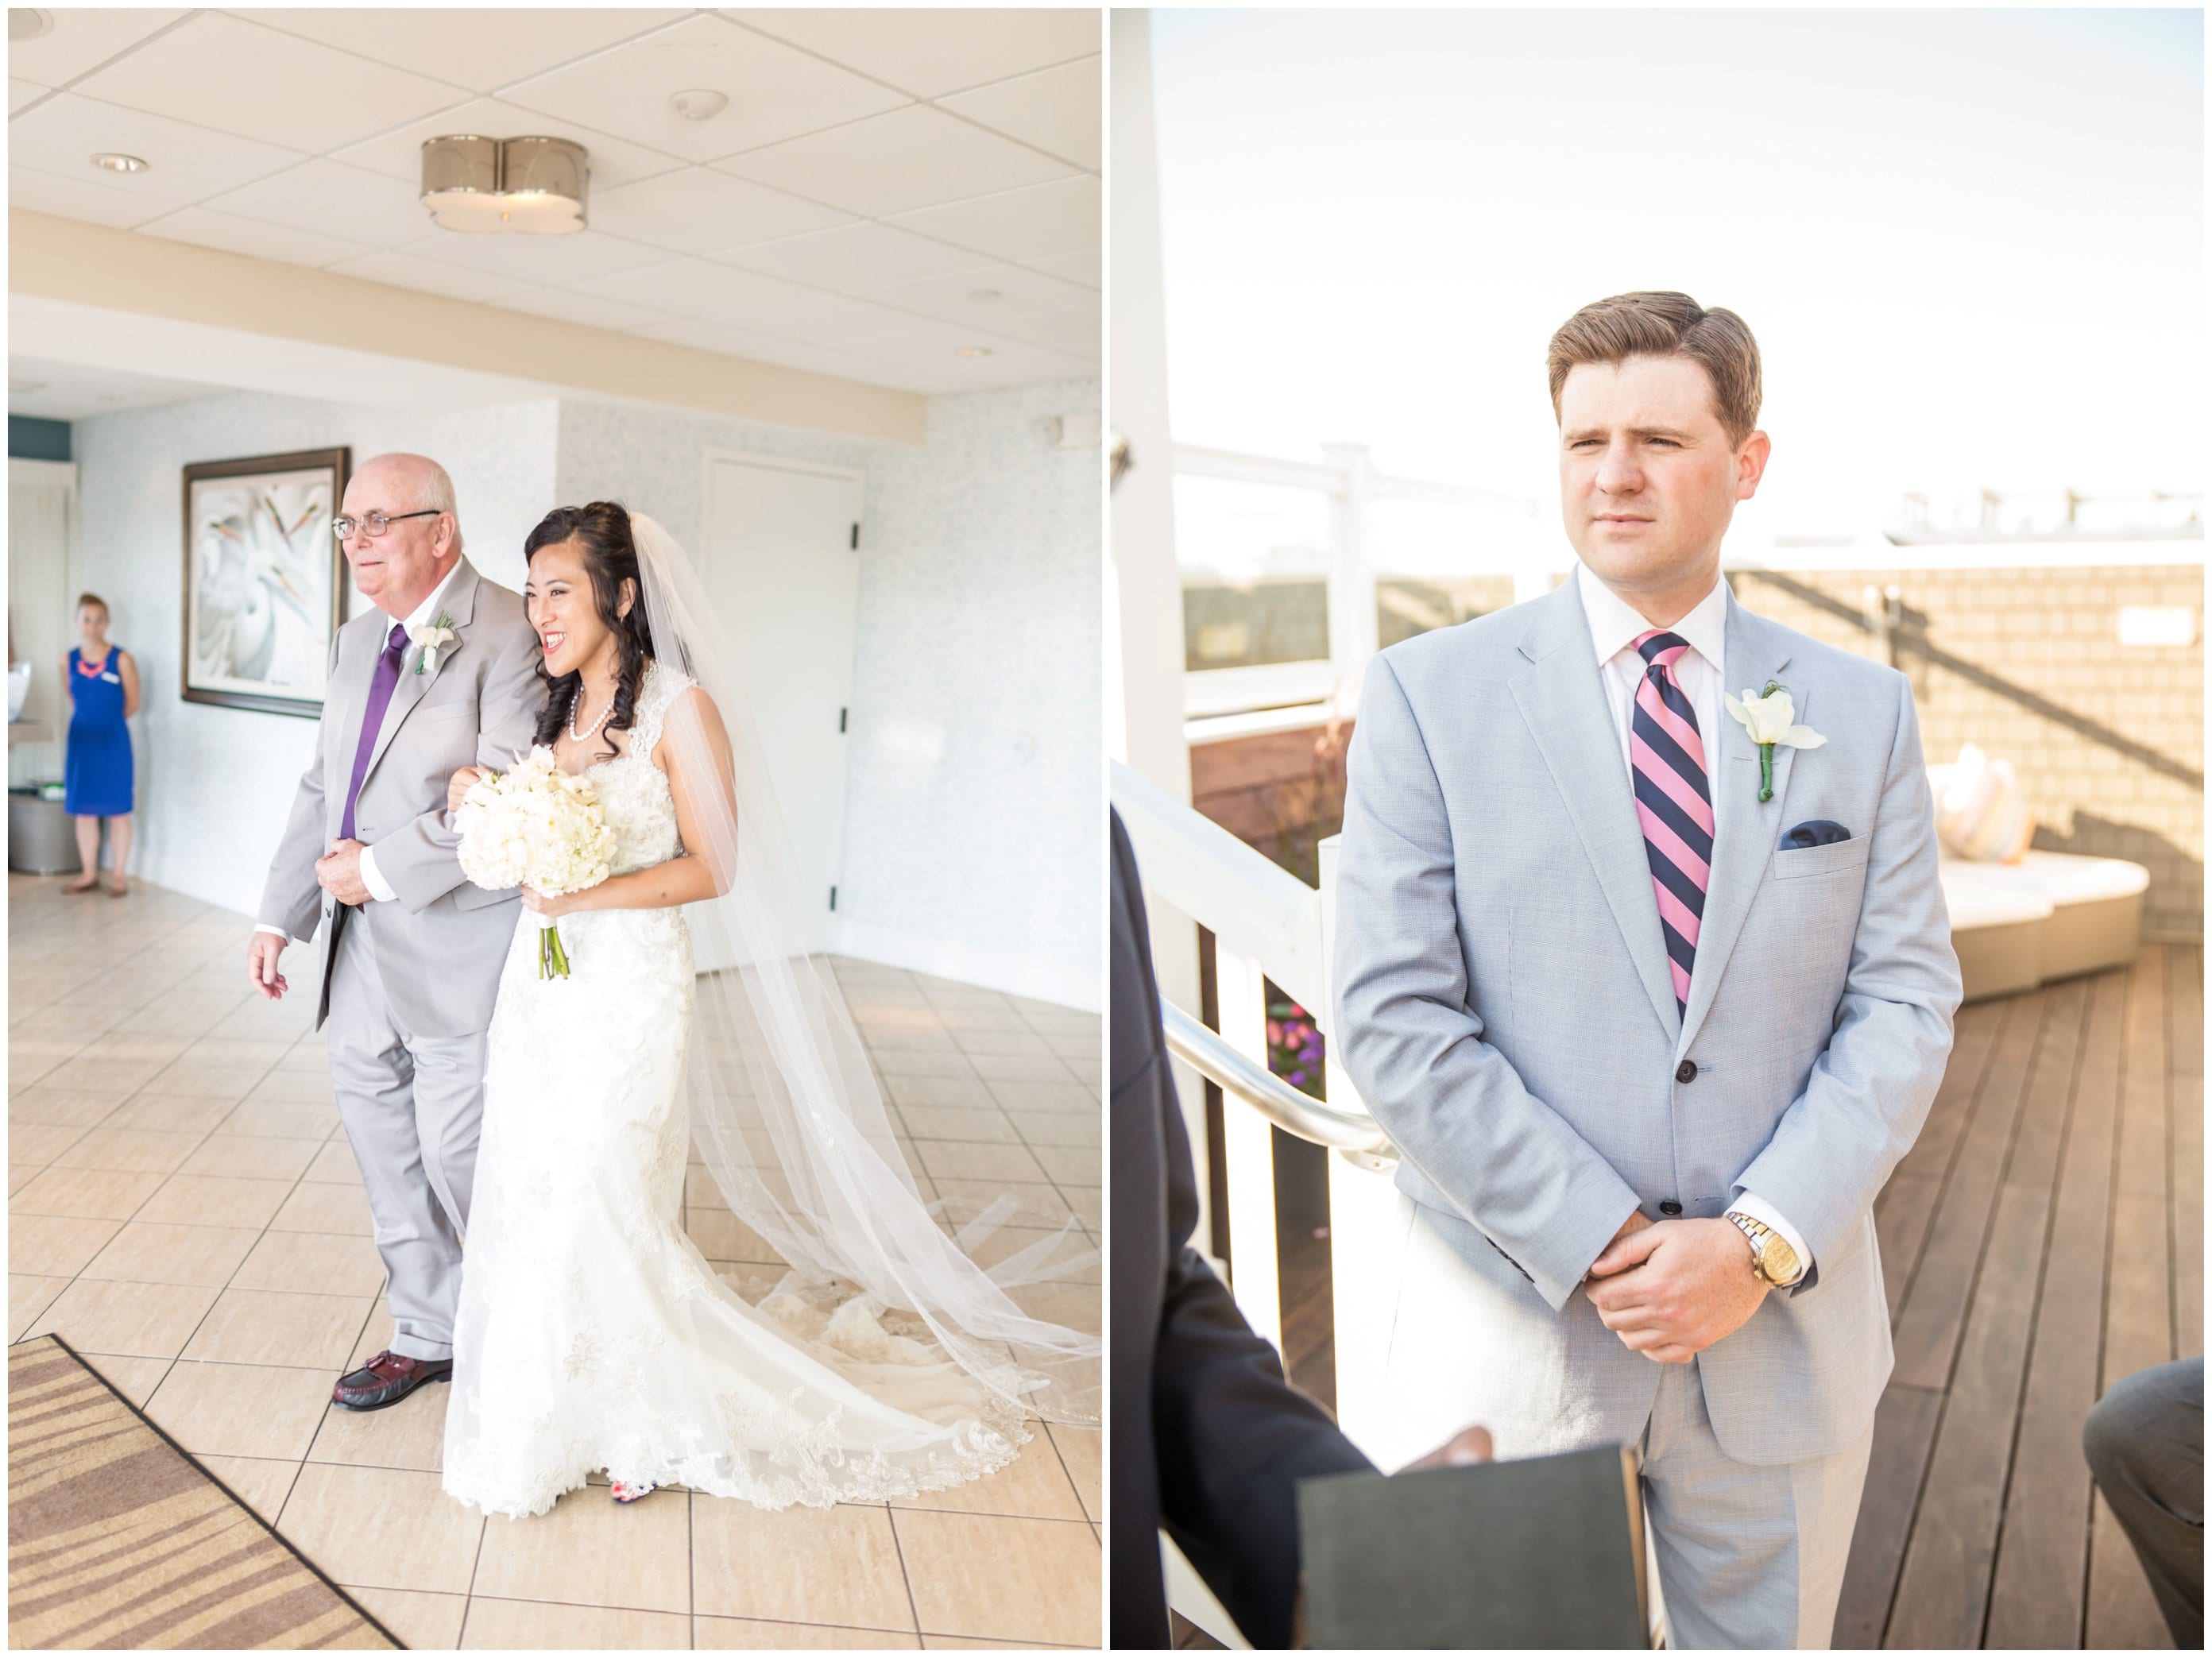 After some lovely portraits on the beaches in Avalon, we headed back to The Reeds for their private rooftop ceremony. 